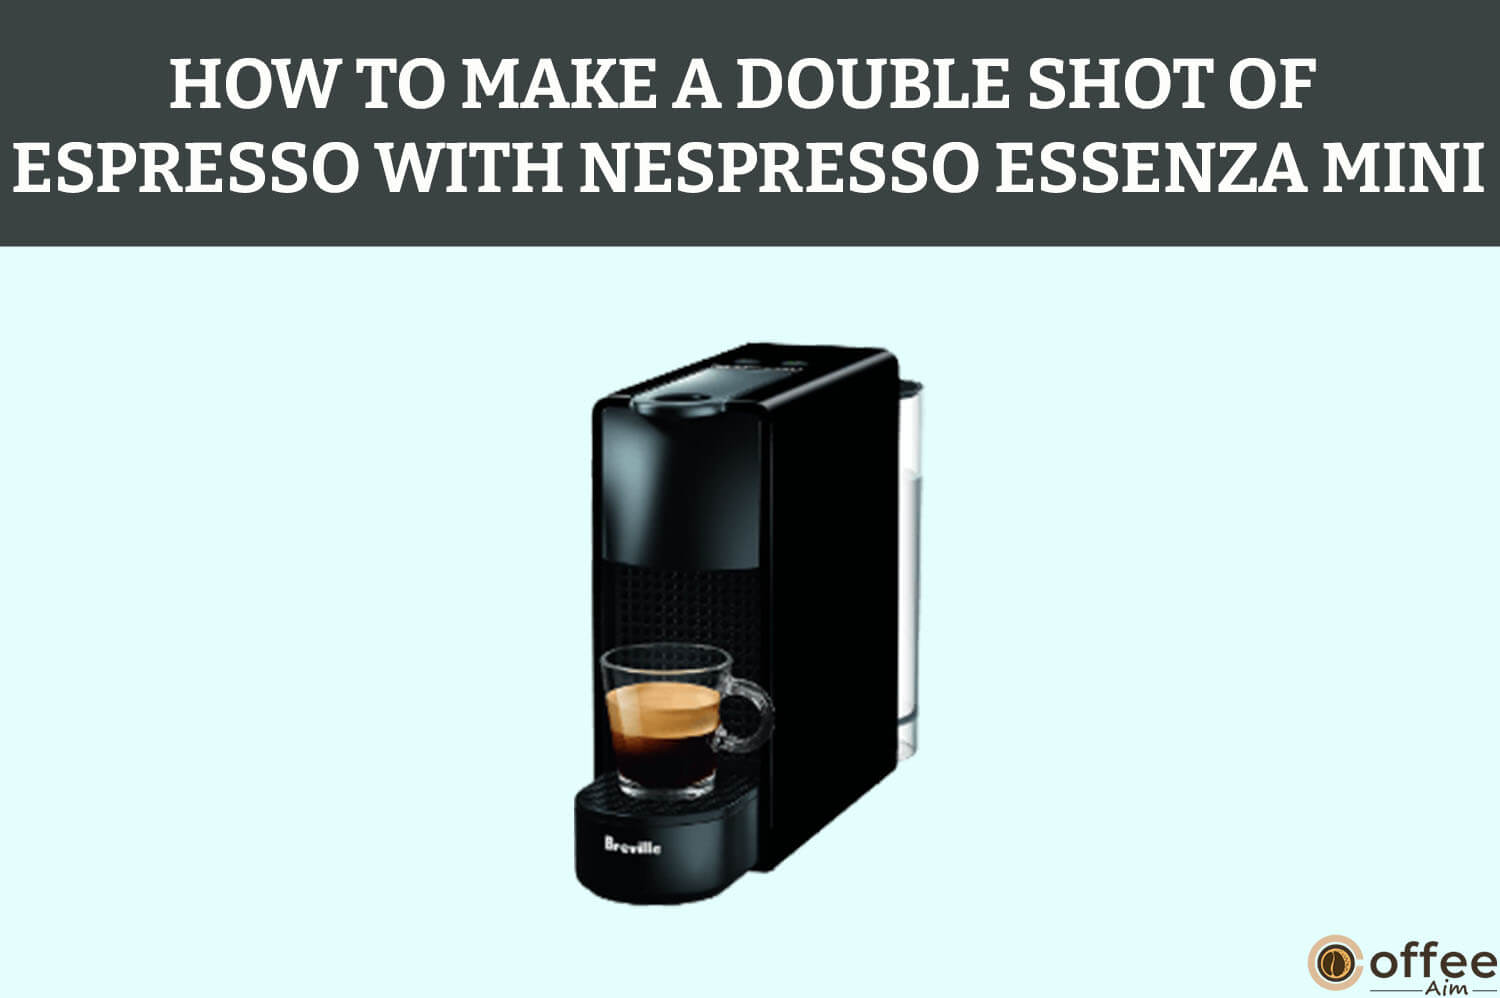 Featured image for the article "How To Make A Double Shot Of Espresso With Nespresso Essenza Mini"